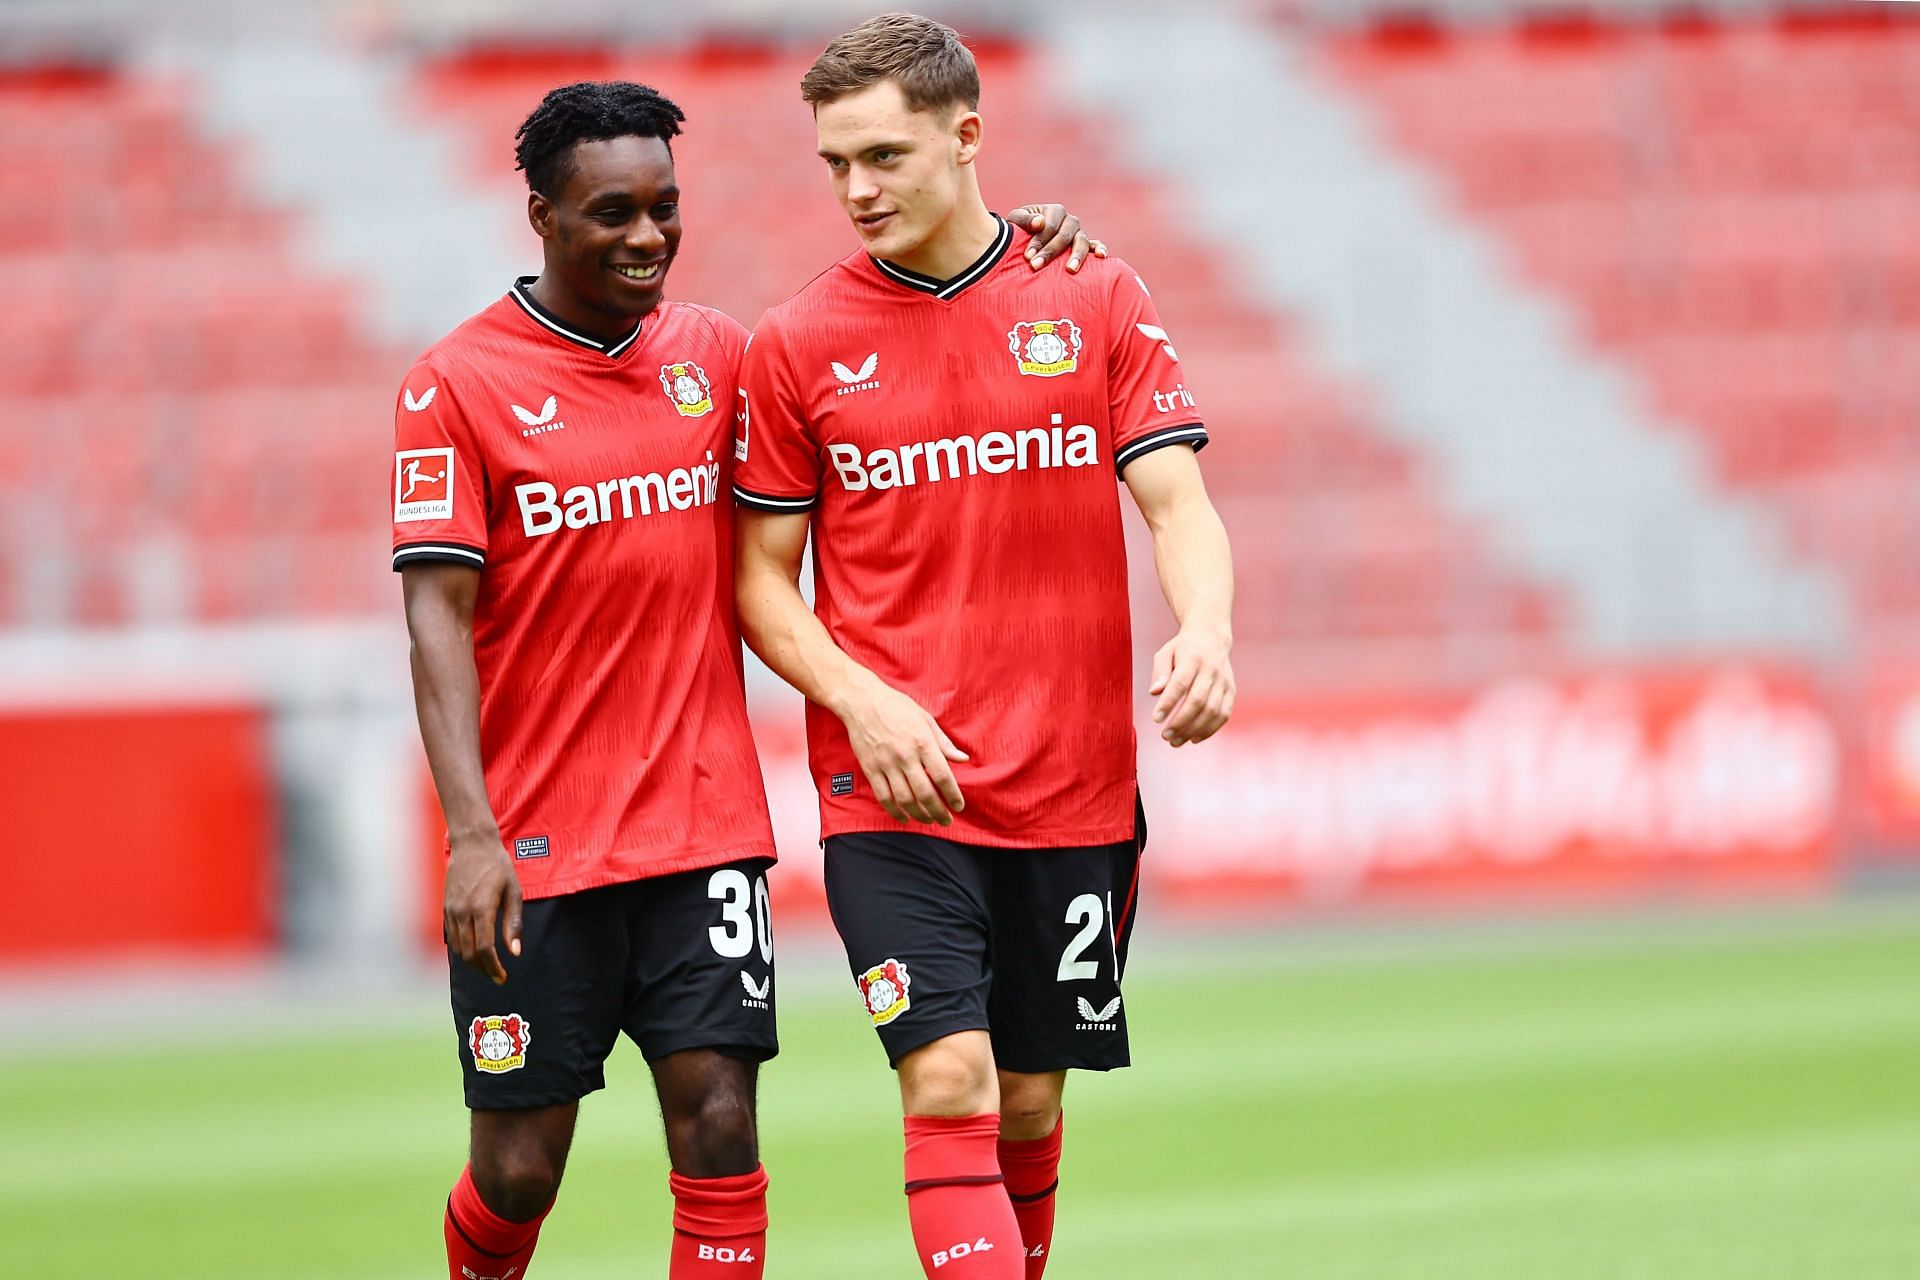 Bayer Leverkusen have a point to prove